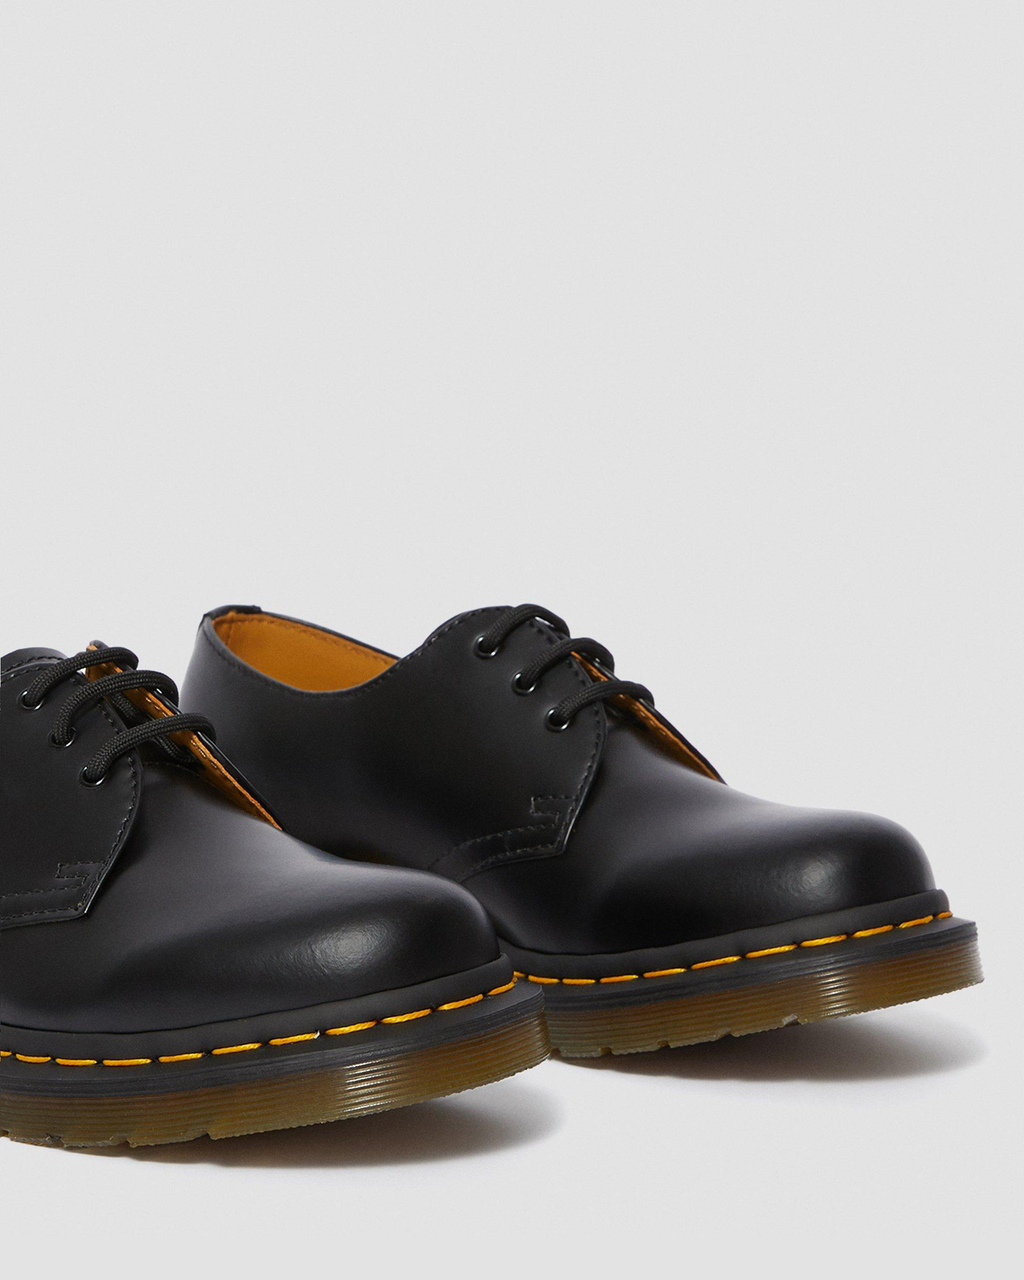 Dr. Martens Women's 1461W Leather Oxford Shoes